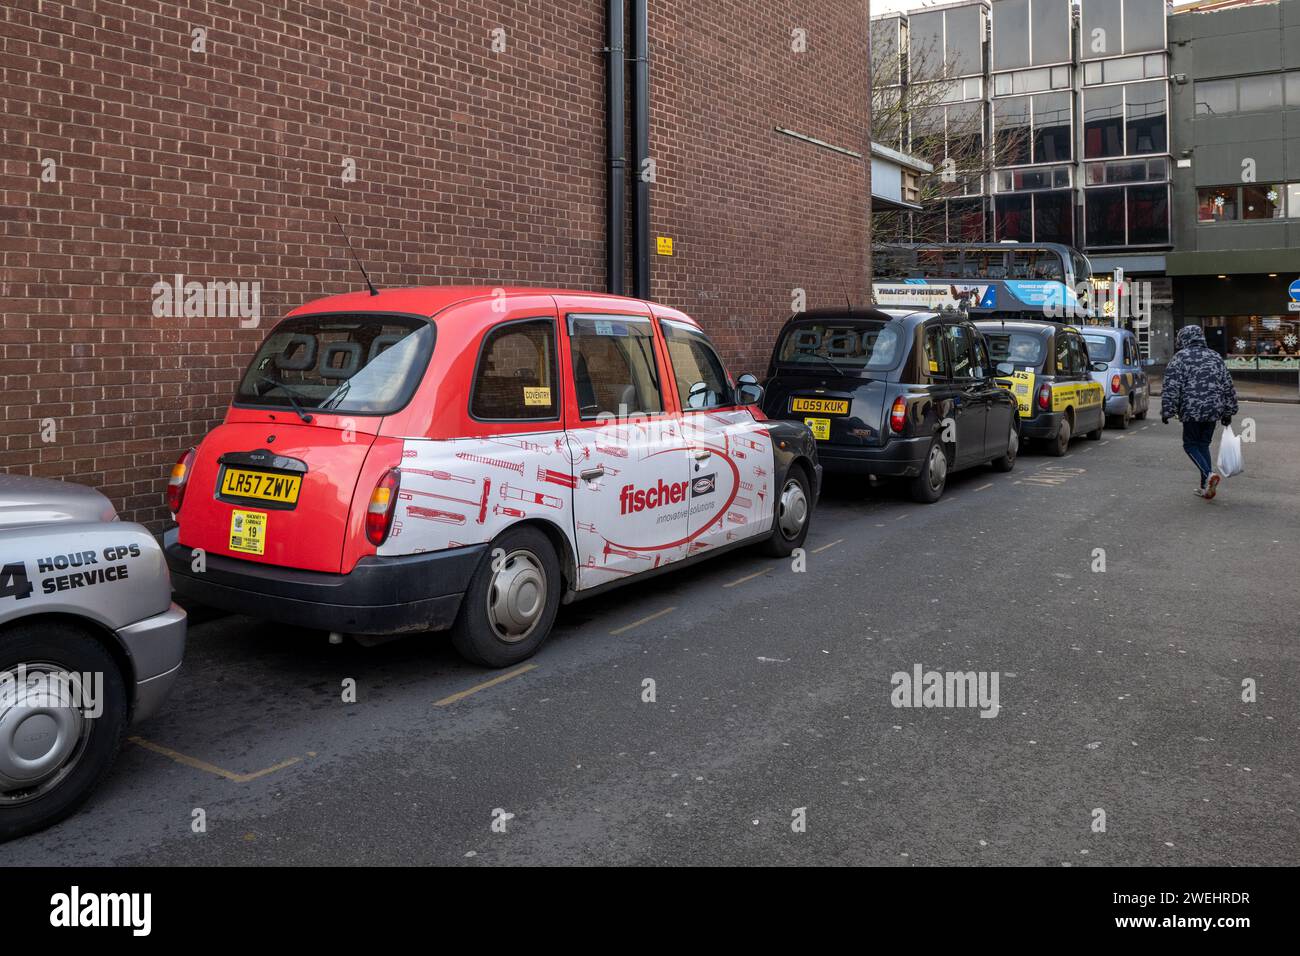 Line of taxis waiting for fares in the Burgess, Coventry, West Midlands, UK. Stock Photo